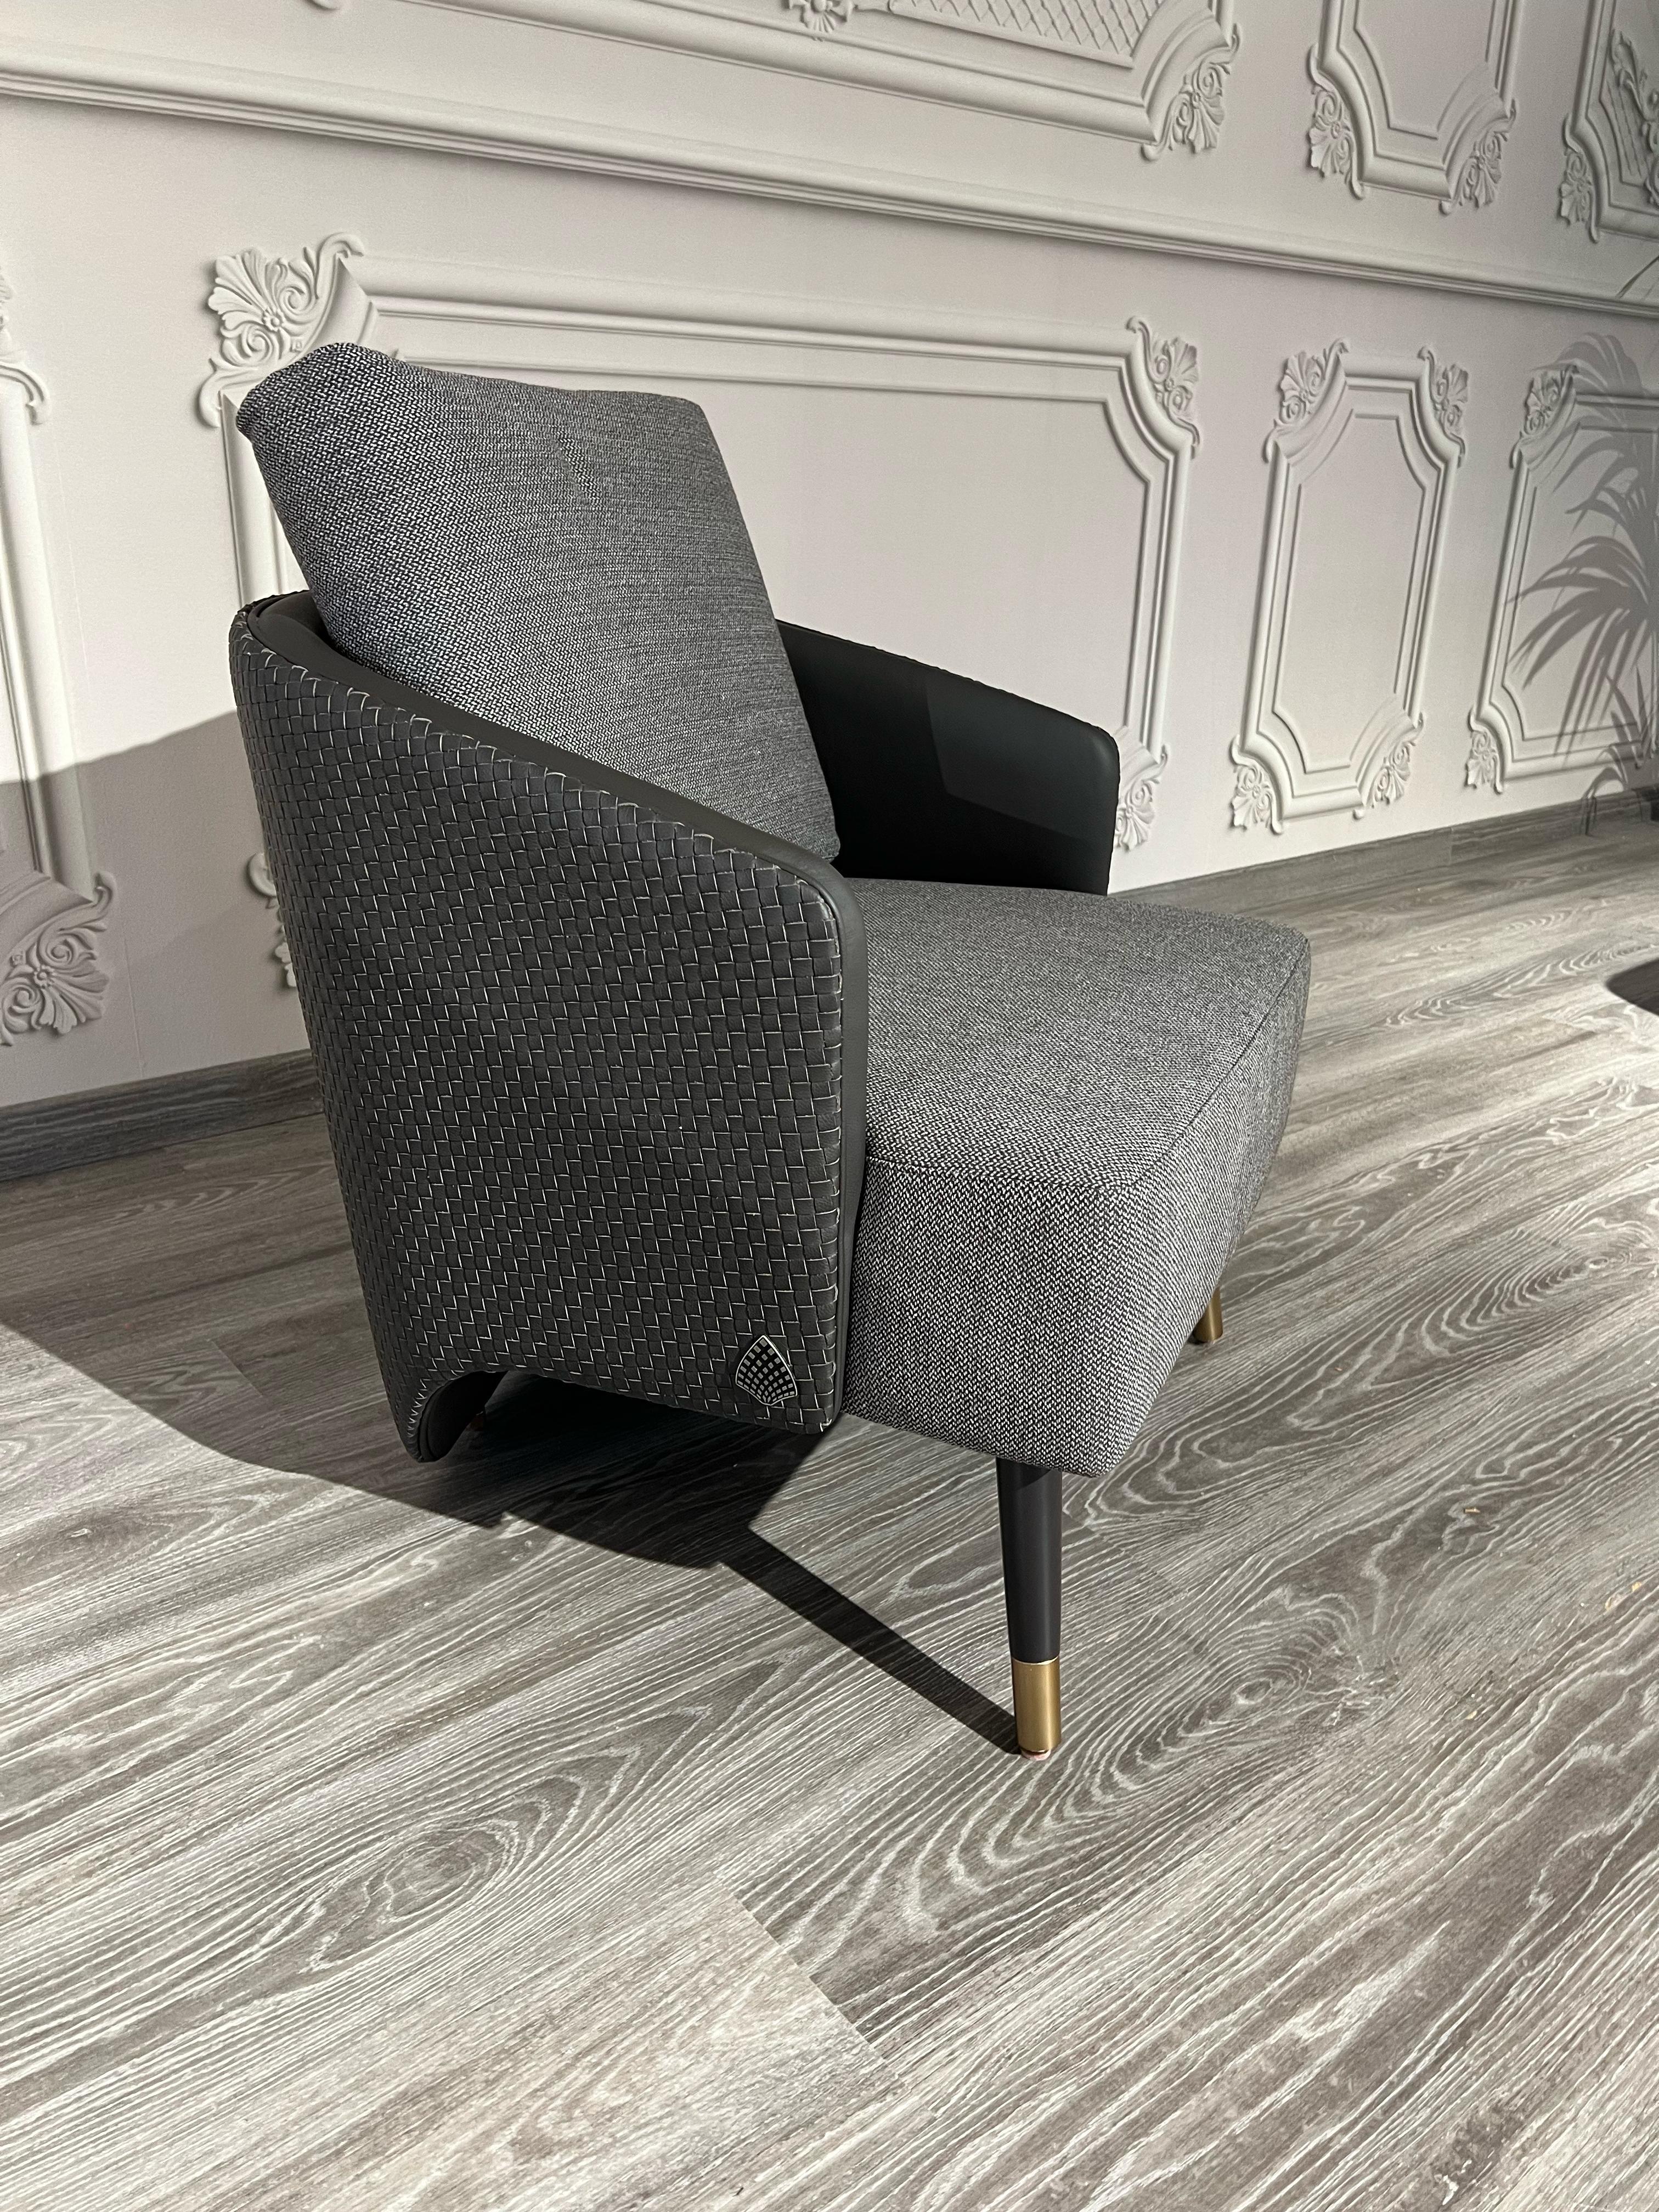 The Brigitte armchair, is inspired by the world of fashion and leather goods. Its hard shell characterized by its silhouette is covered in the highest quality hand-woven leather. The shell and the seat and back cushions are customizable in